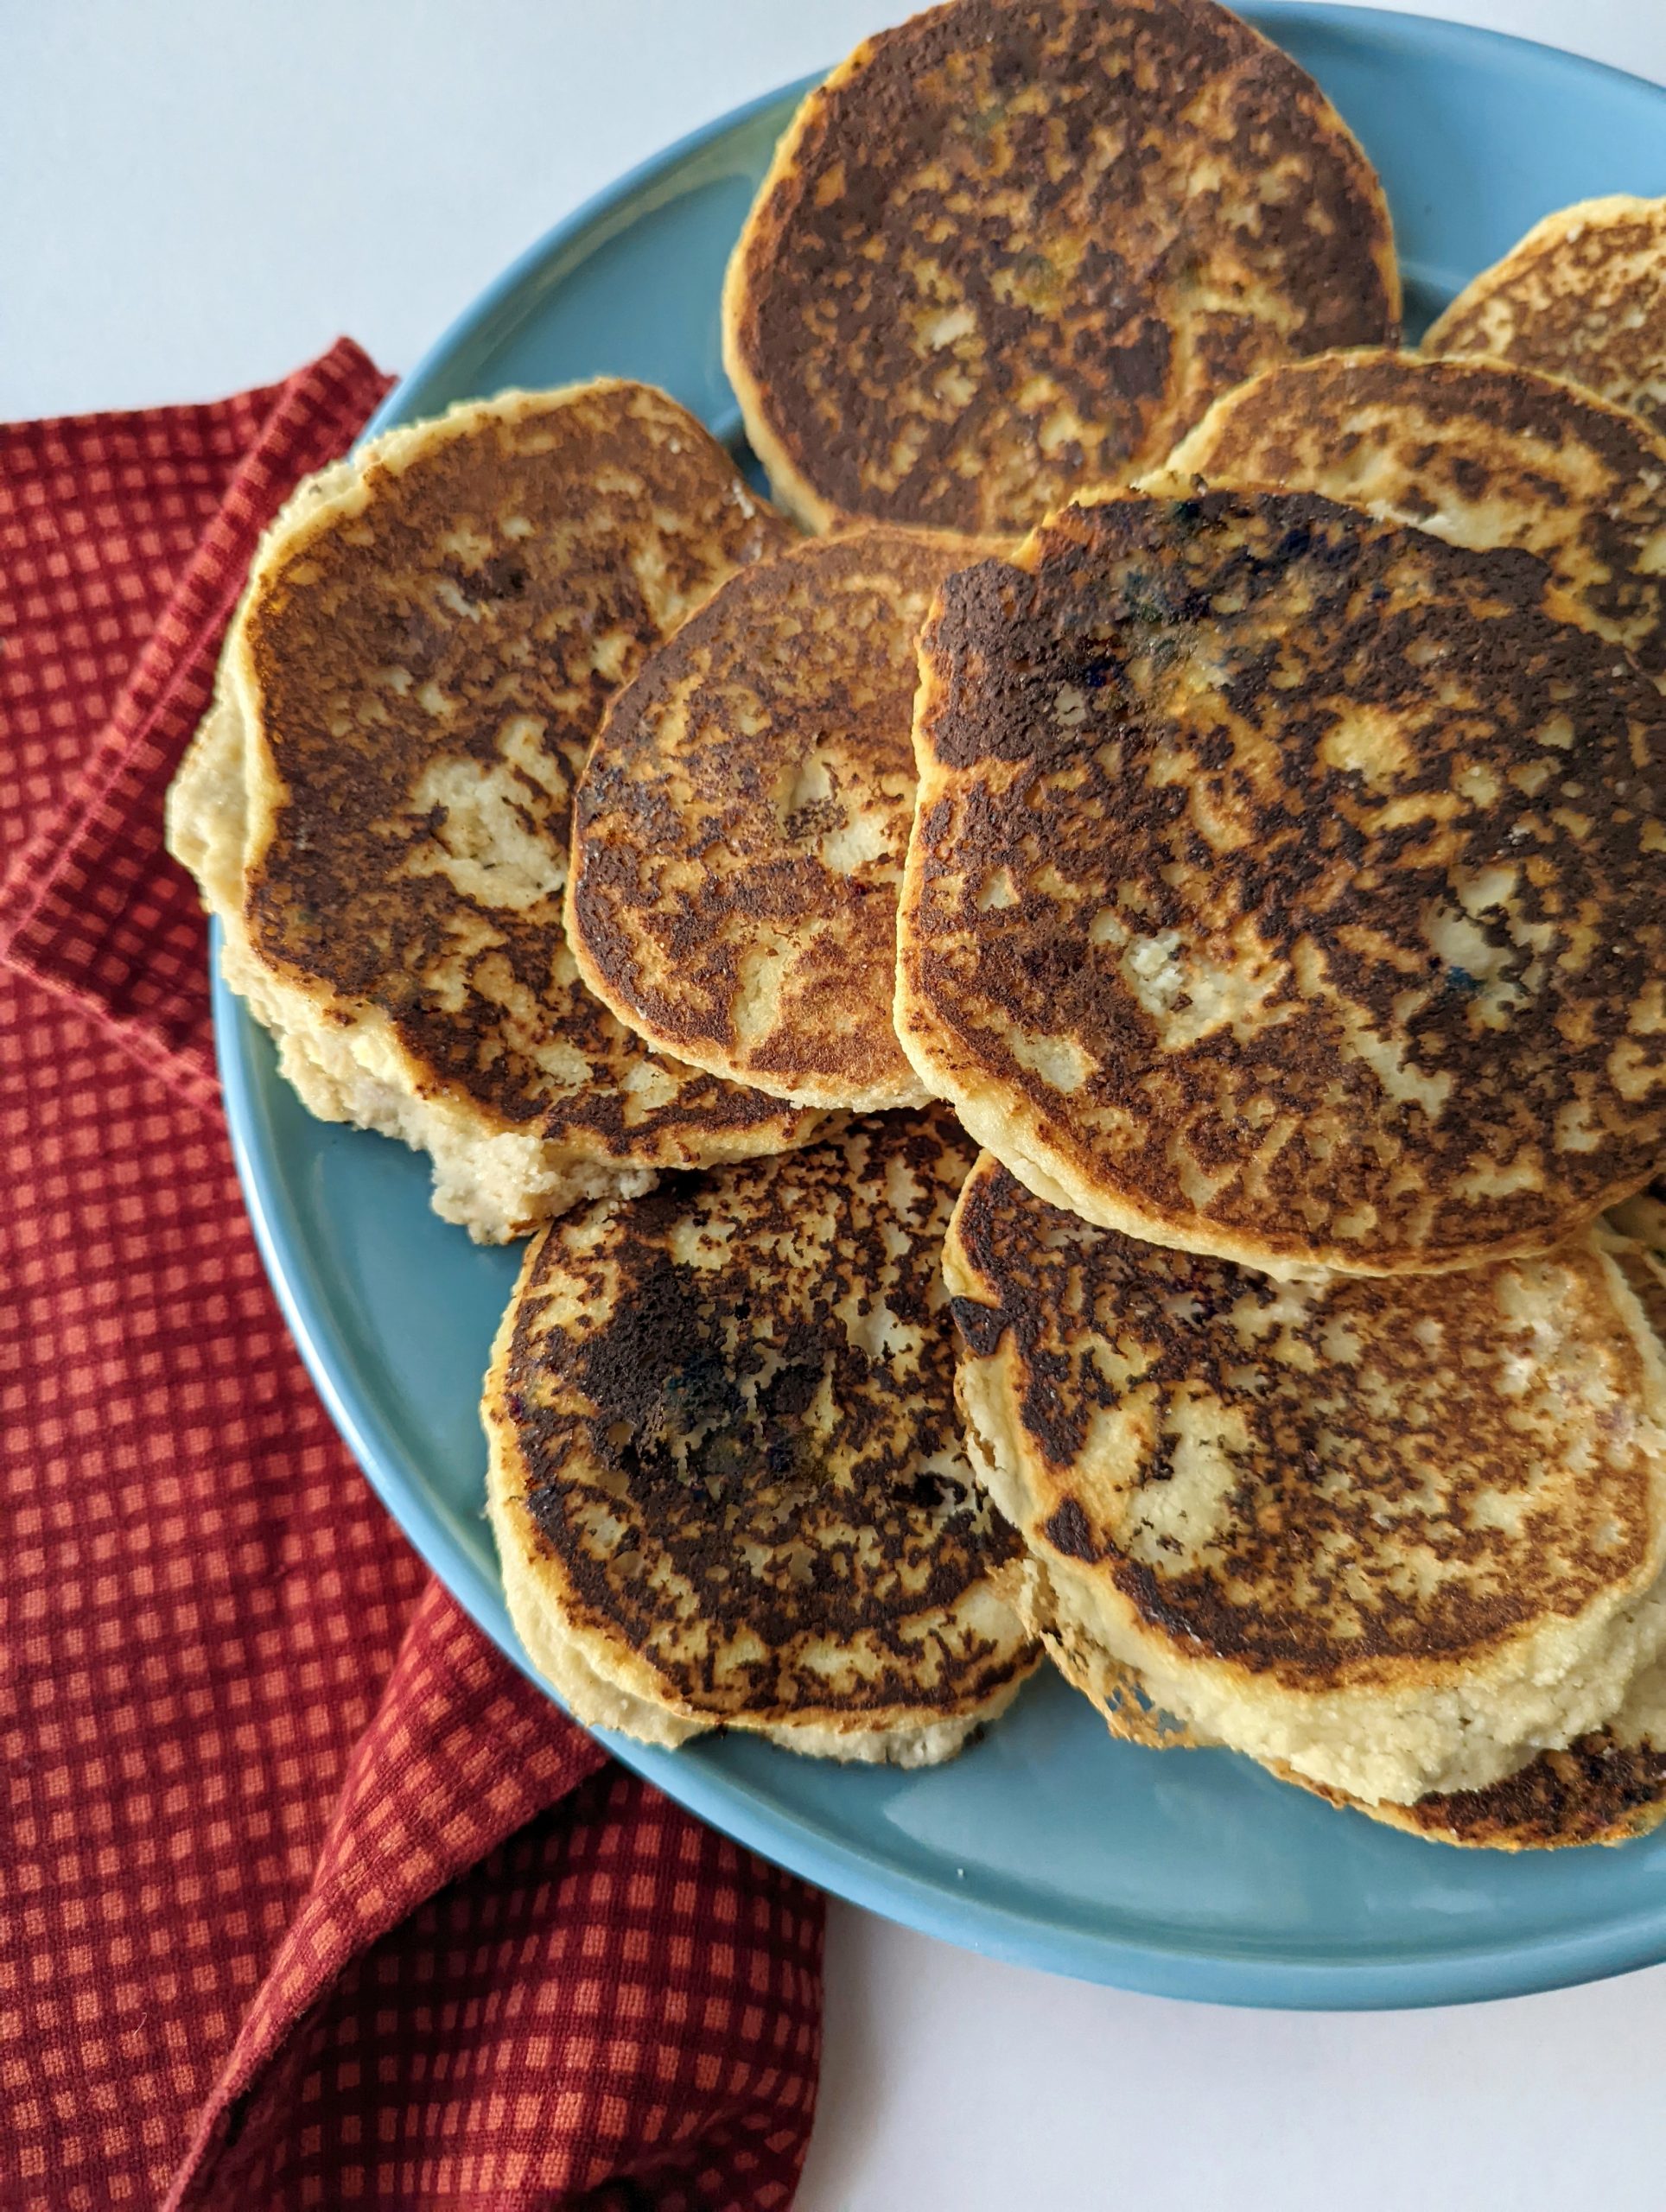 A heaping pile of freshly made almond flour pancakes.